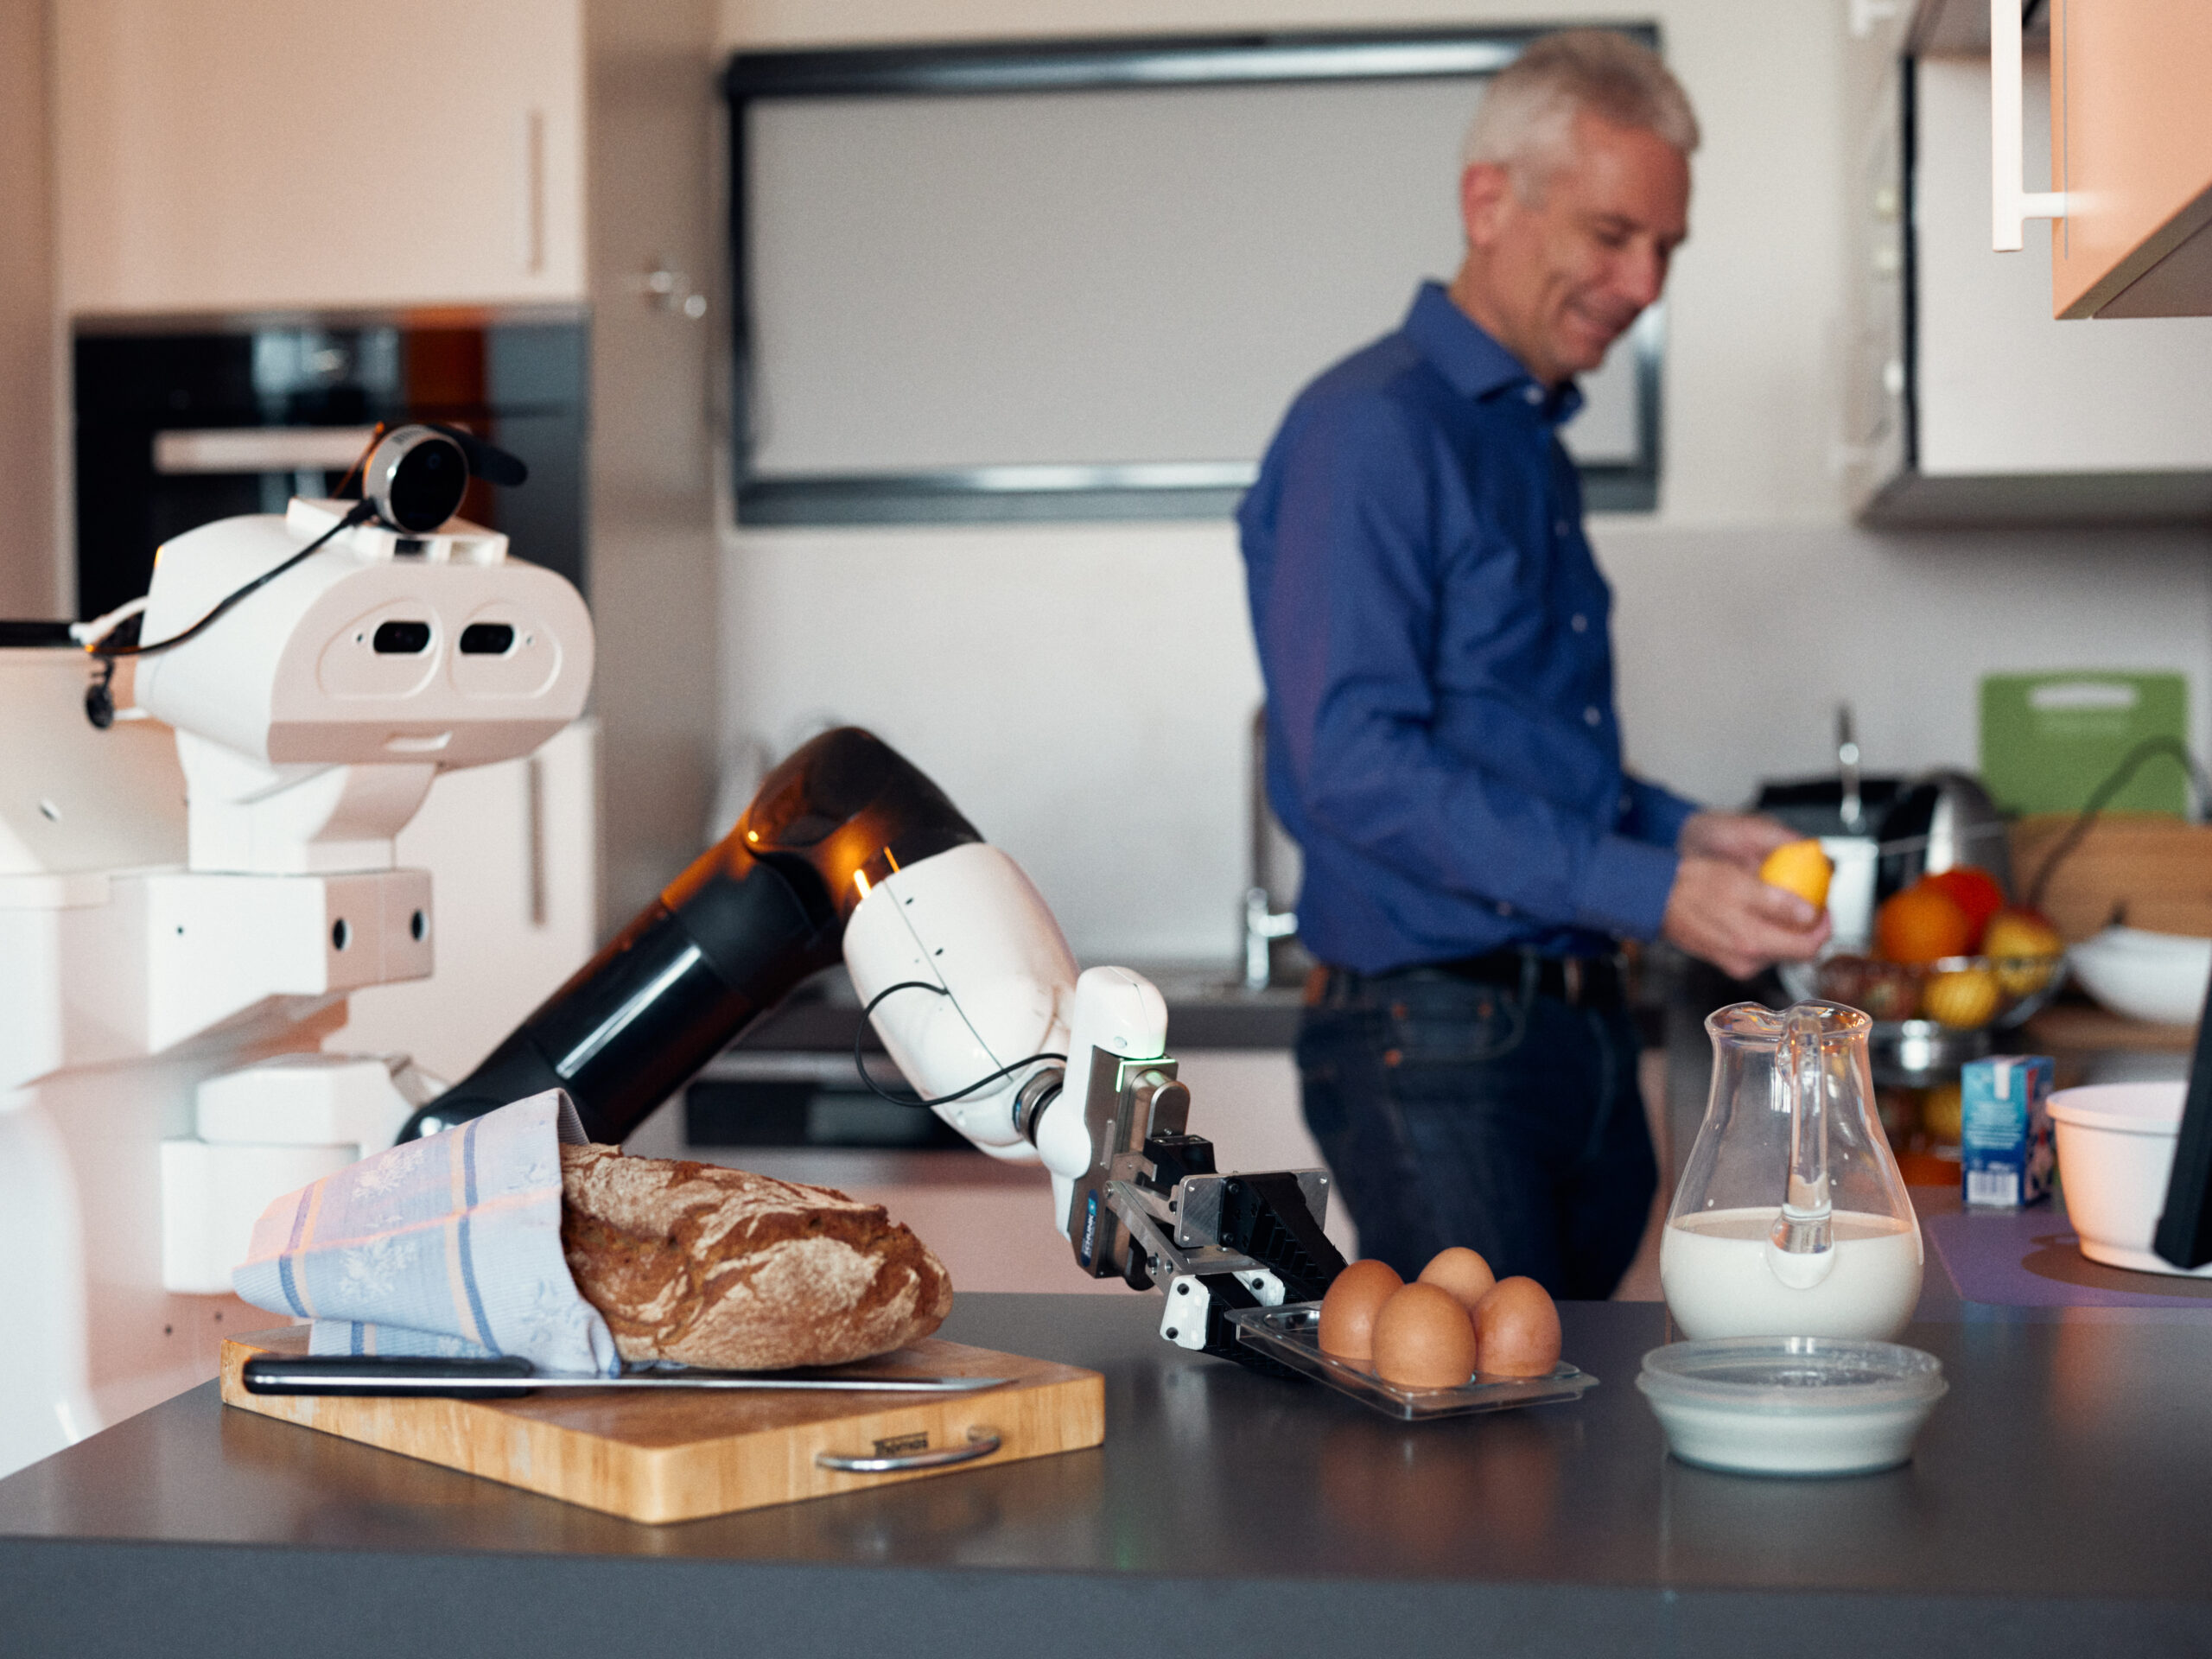 A robot helping with preparing breakfast.